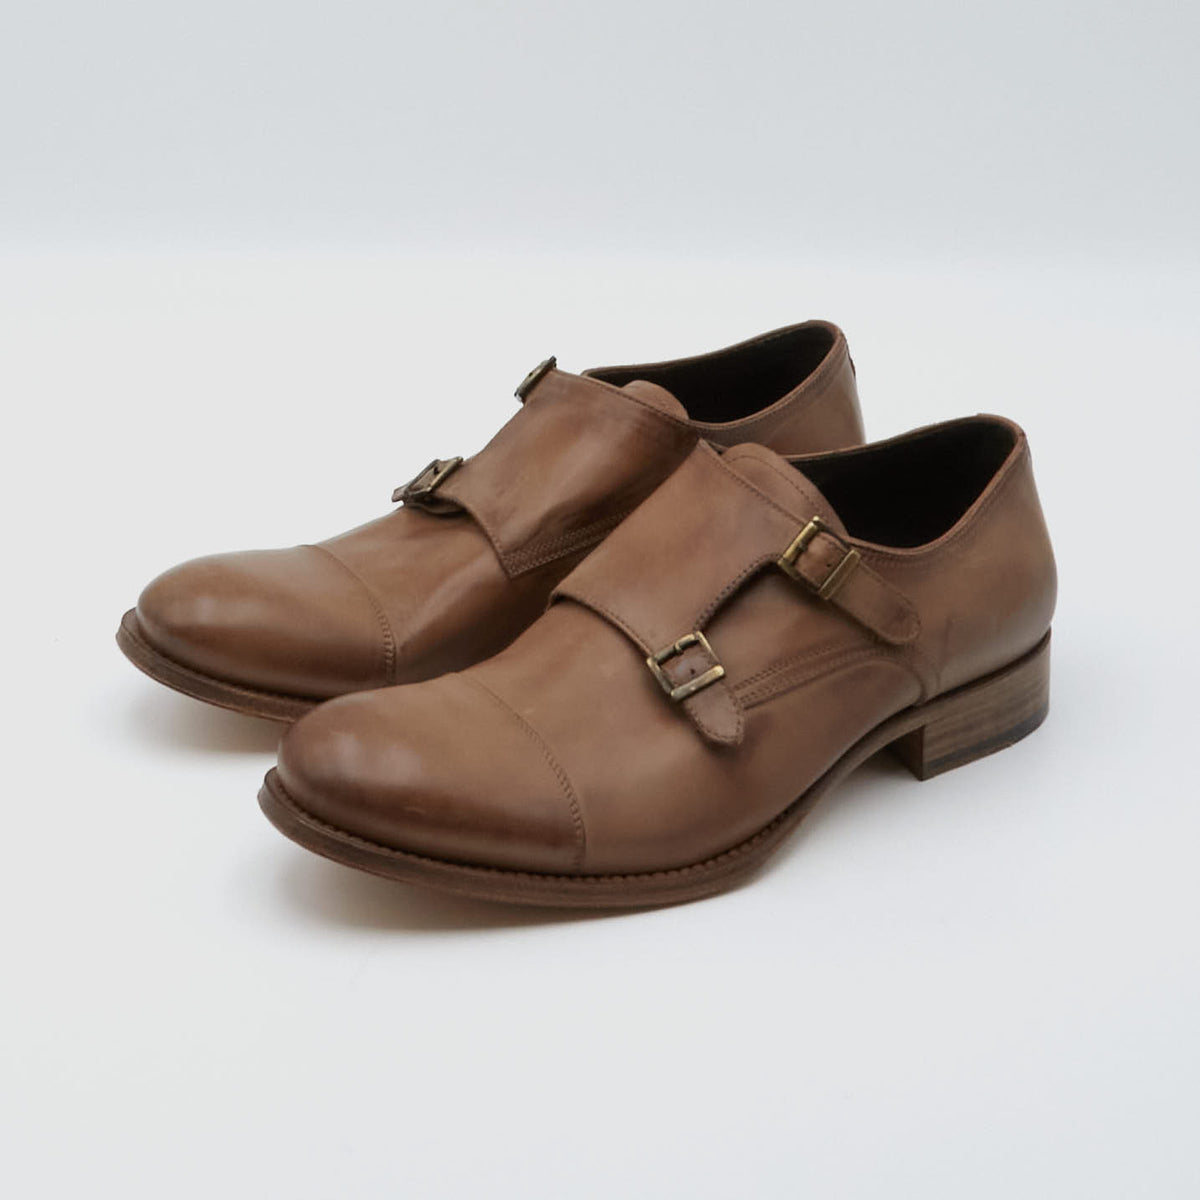 n.d.c. made by hand New Monk Vintage Look Shoe